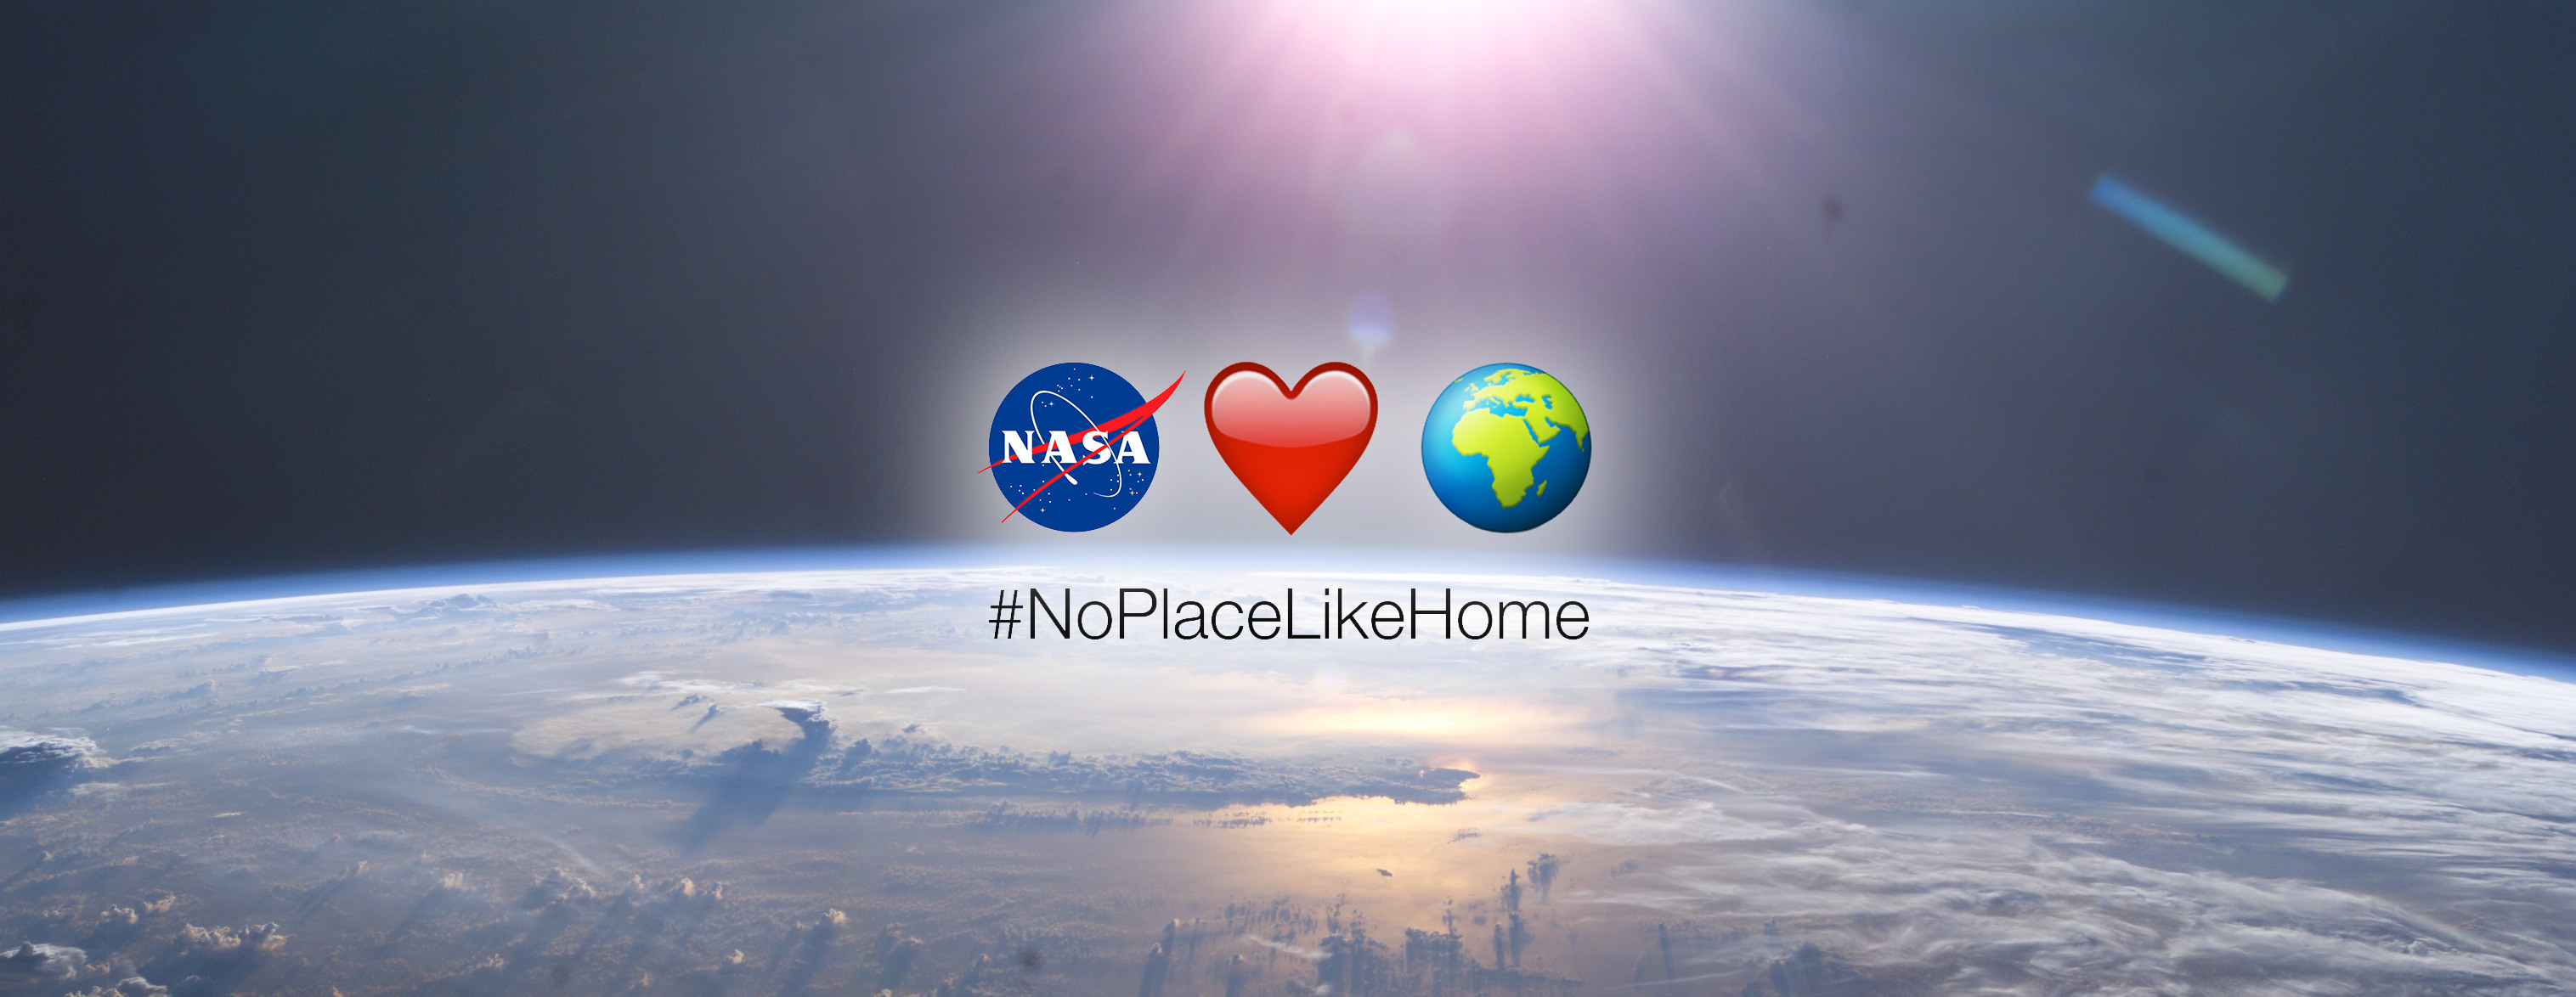 3032x1174 Earth Â· #NoPlaceLikeHome emojis superimposed over an Earth photograph from  the ISS